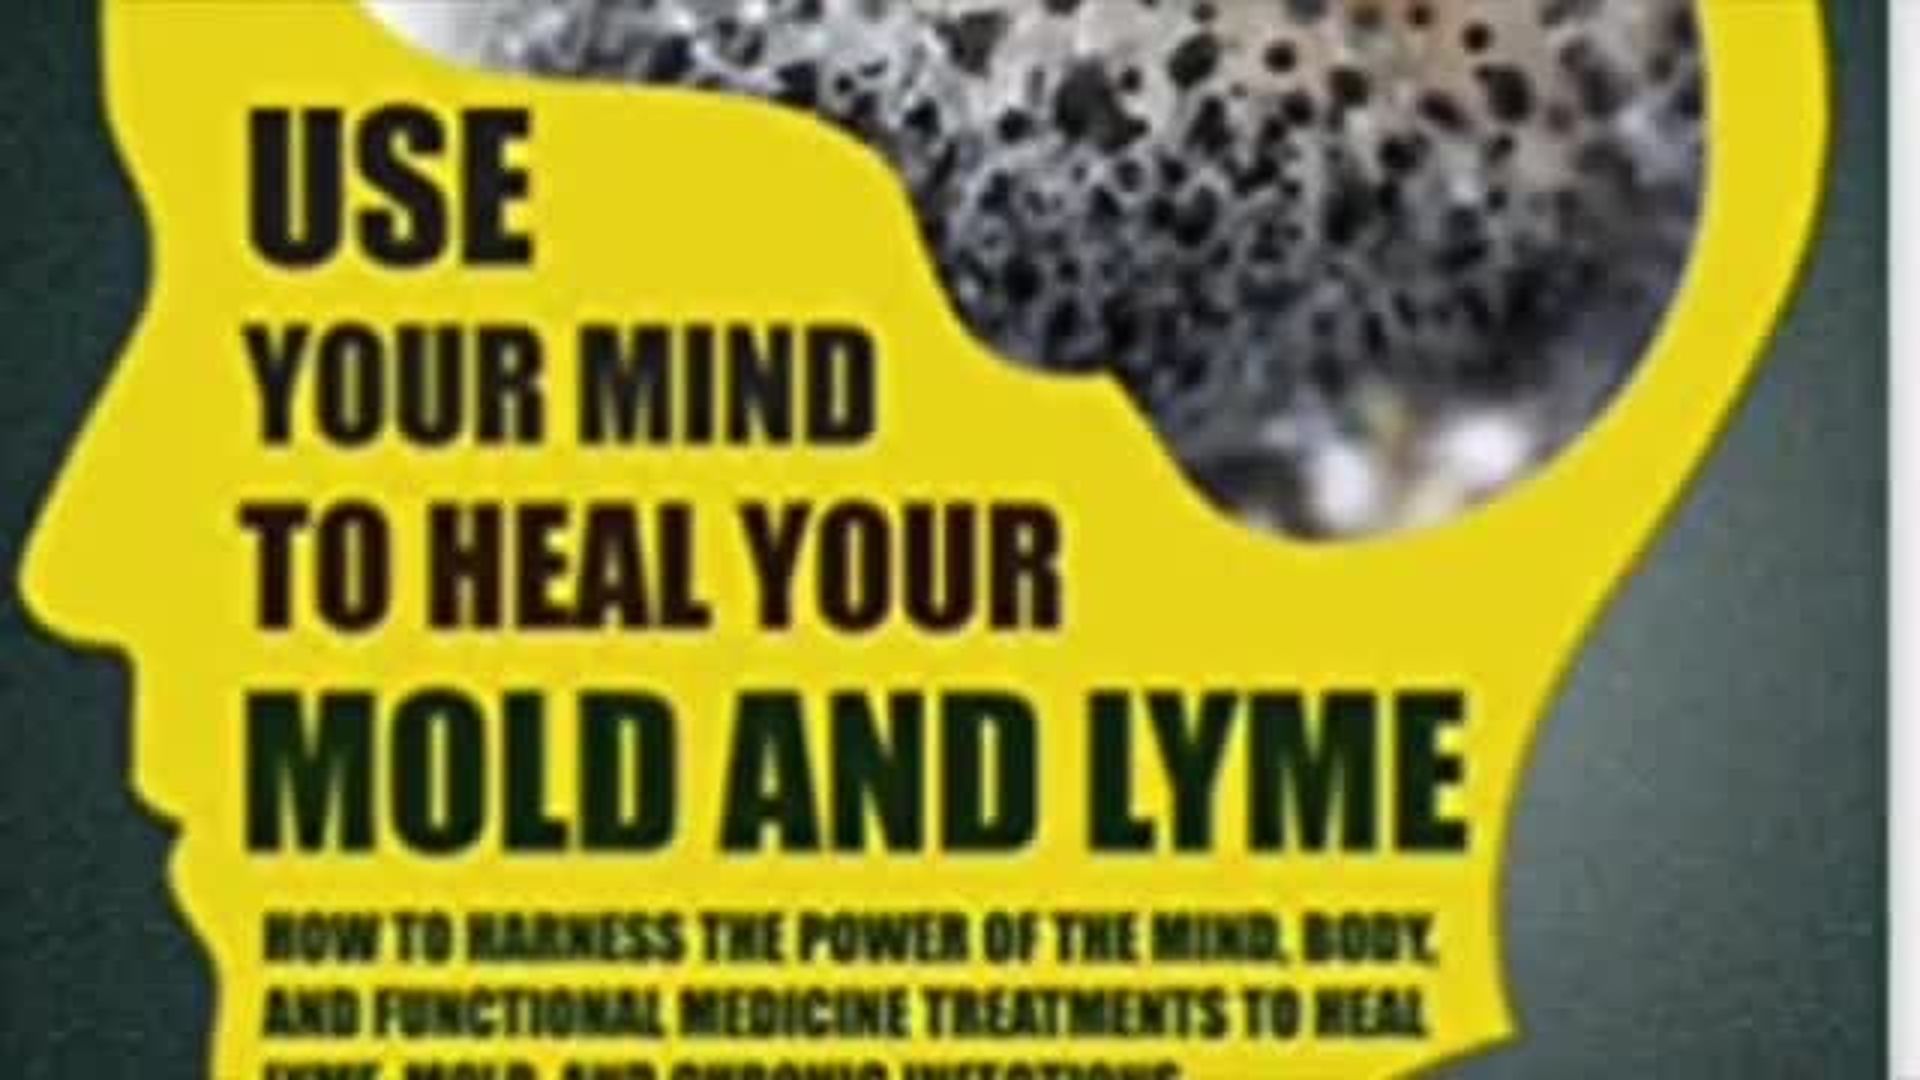 Mold and Lyme Disease - Use Your Mind to Heal with Dr Miles Nichols on High Road to Humanity